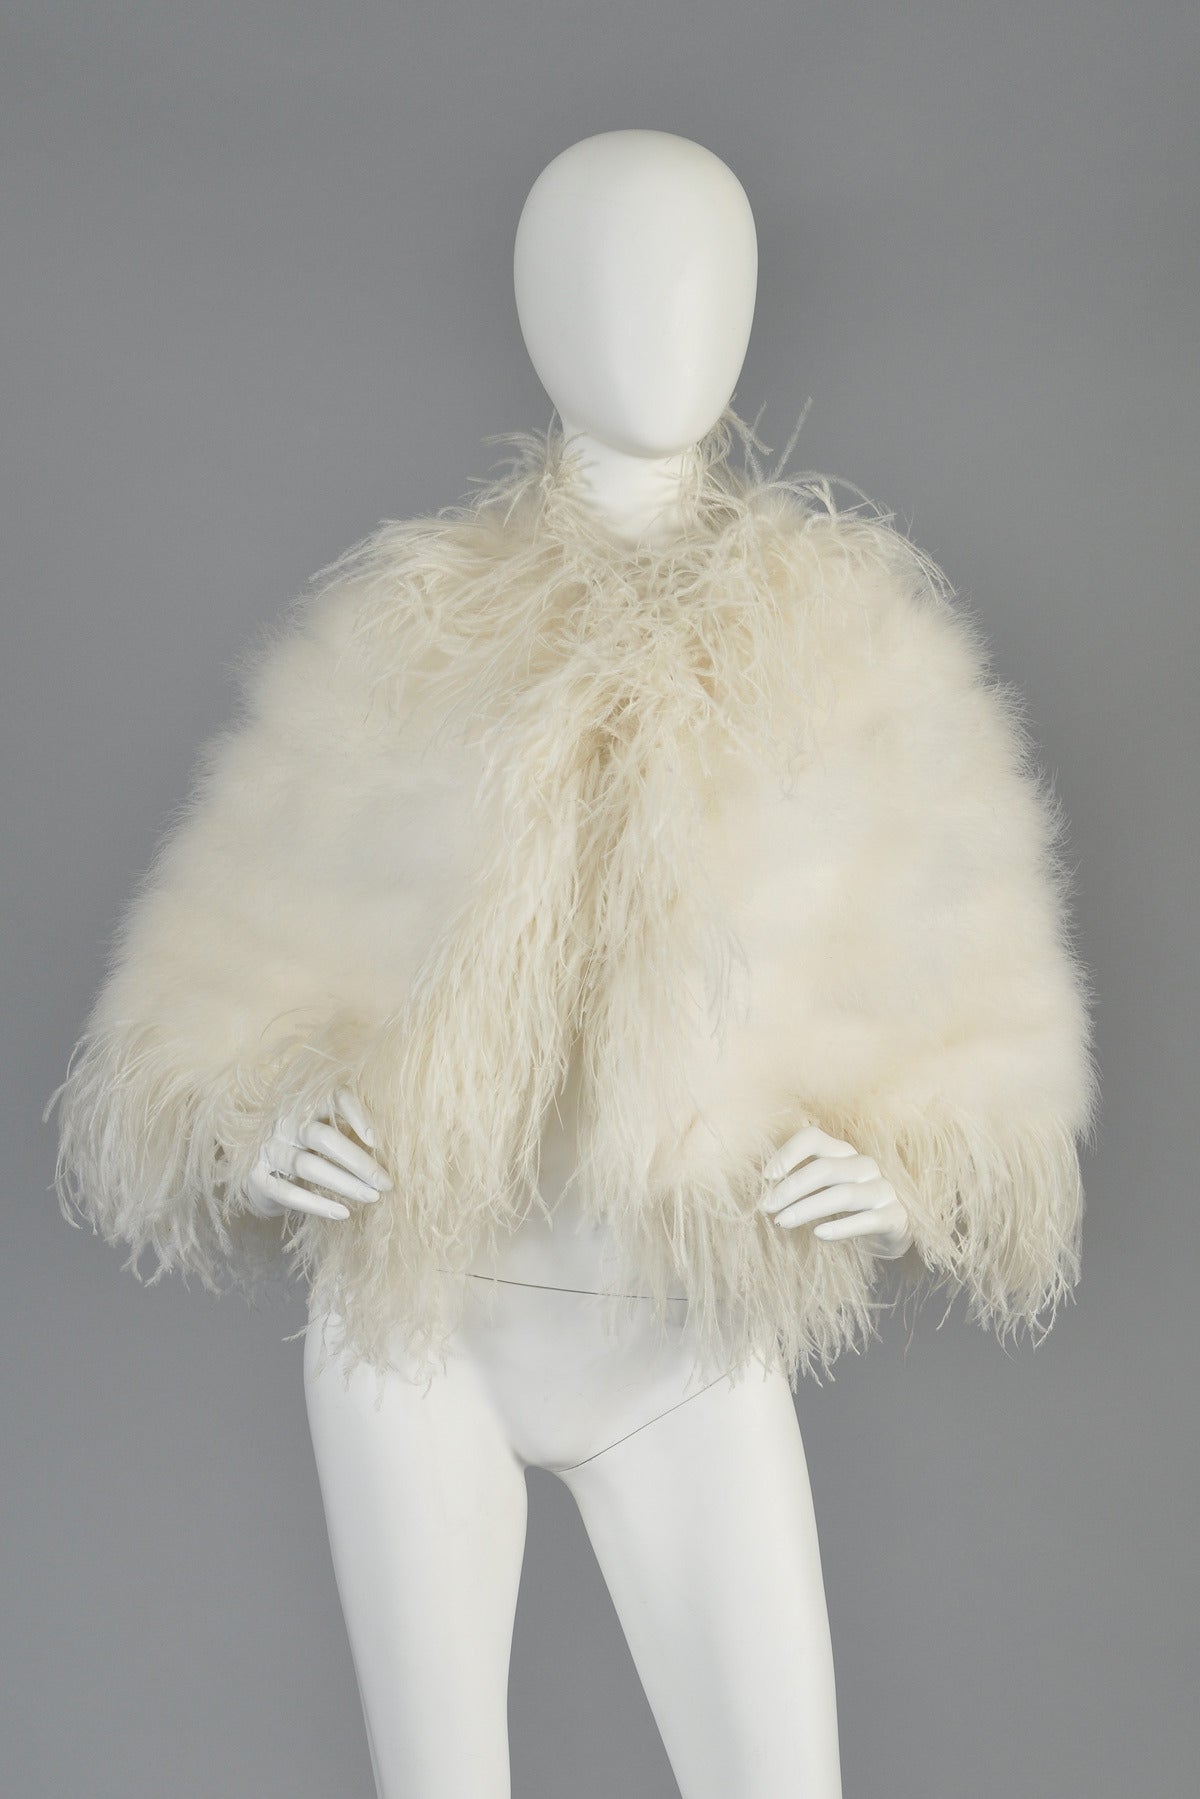 Lovely 1970s marabou and ostrich feather capelet. Such a great find! Perfect on top of any slinky gown, a short cocktail dress or even with jeans! Excellent vintage condition - a few small spots on the lining.

MEASUREMENTS
Bust: 44